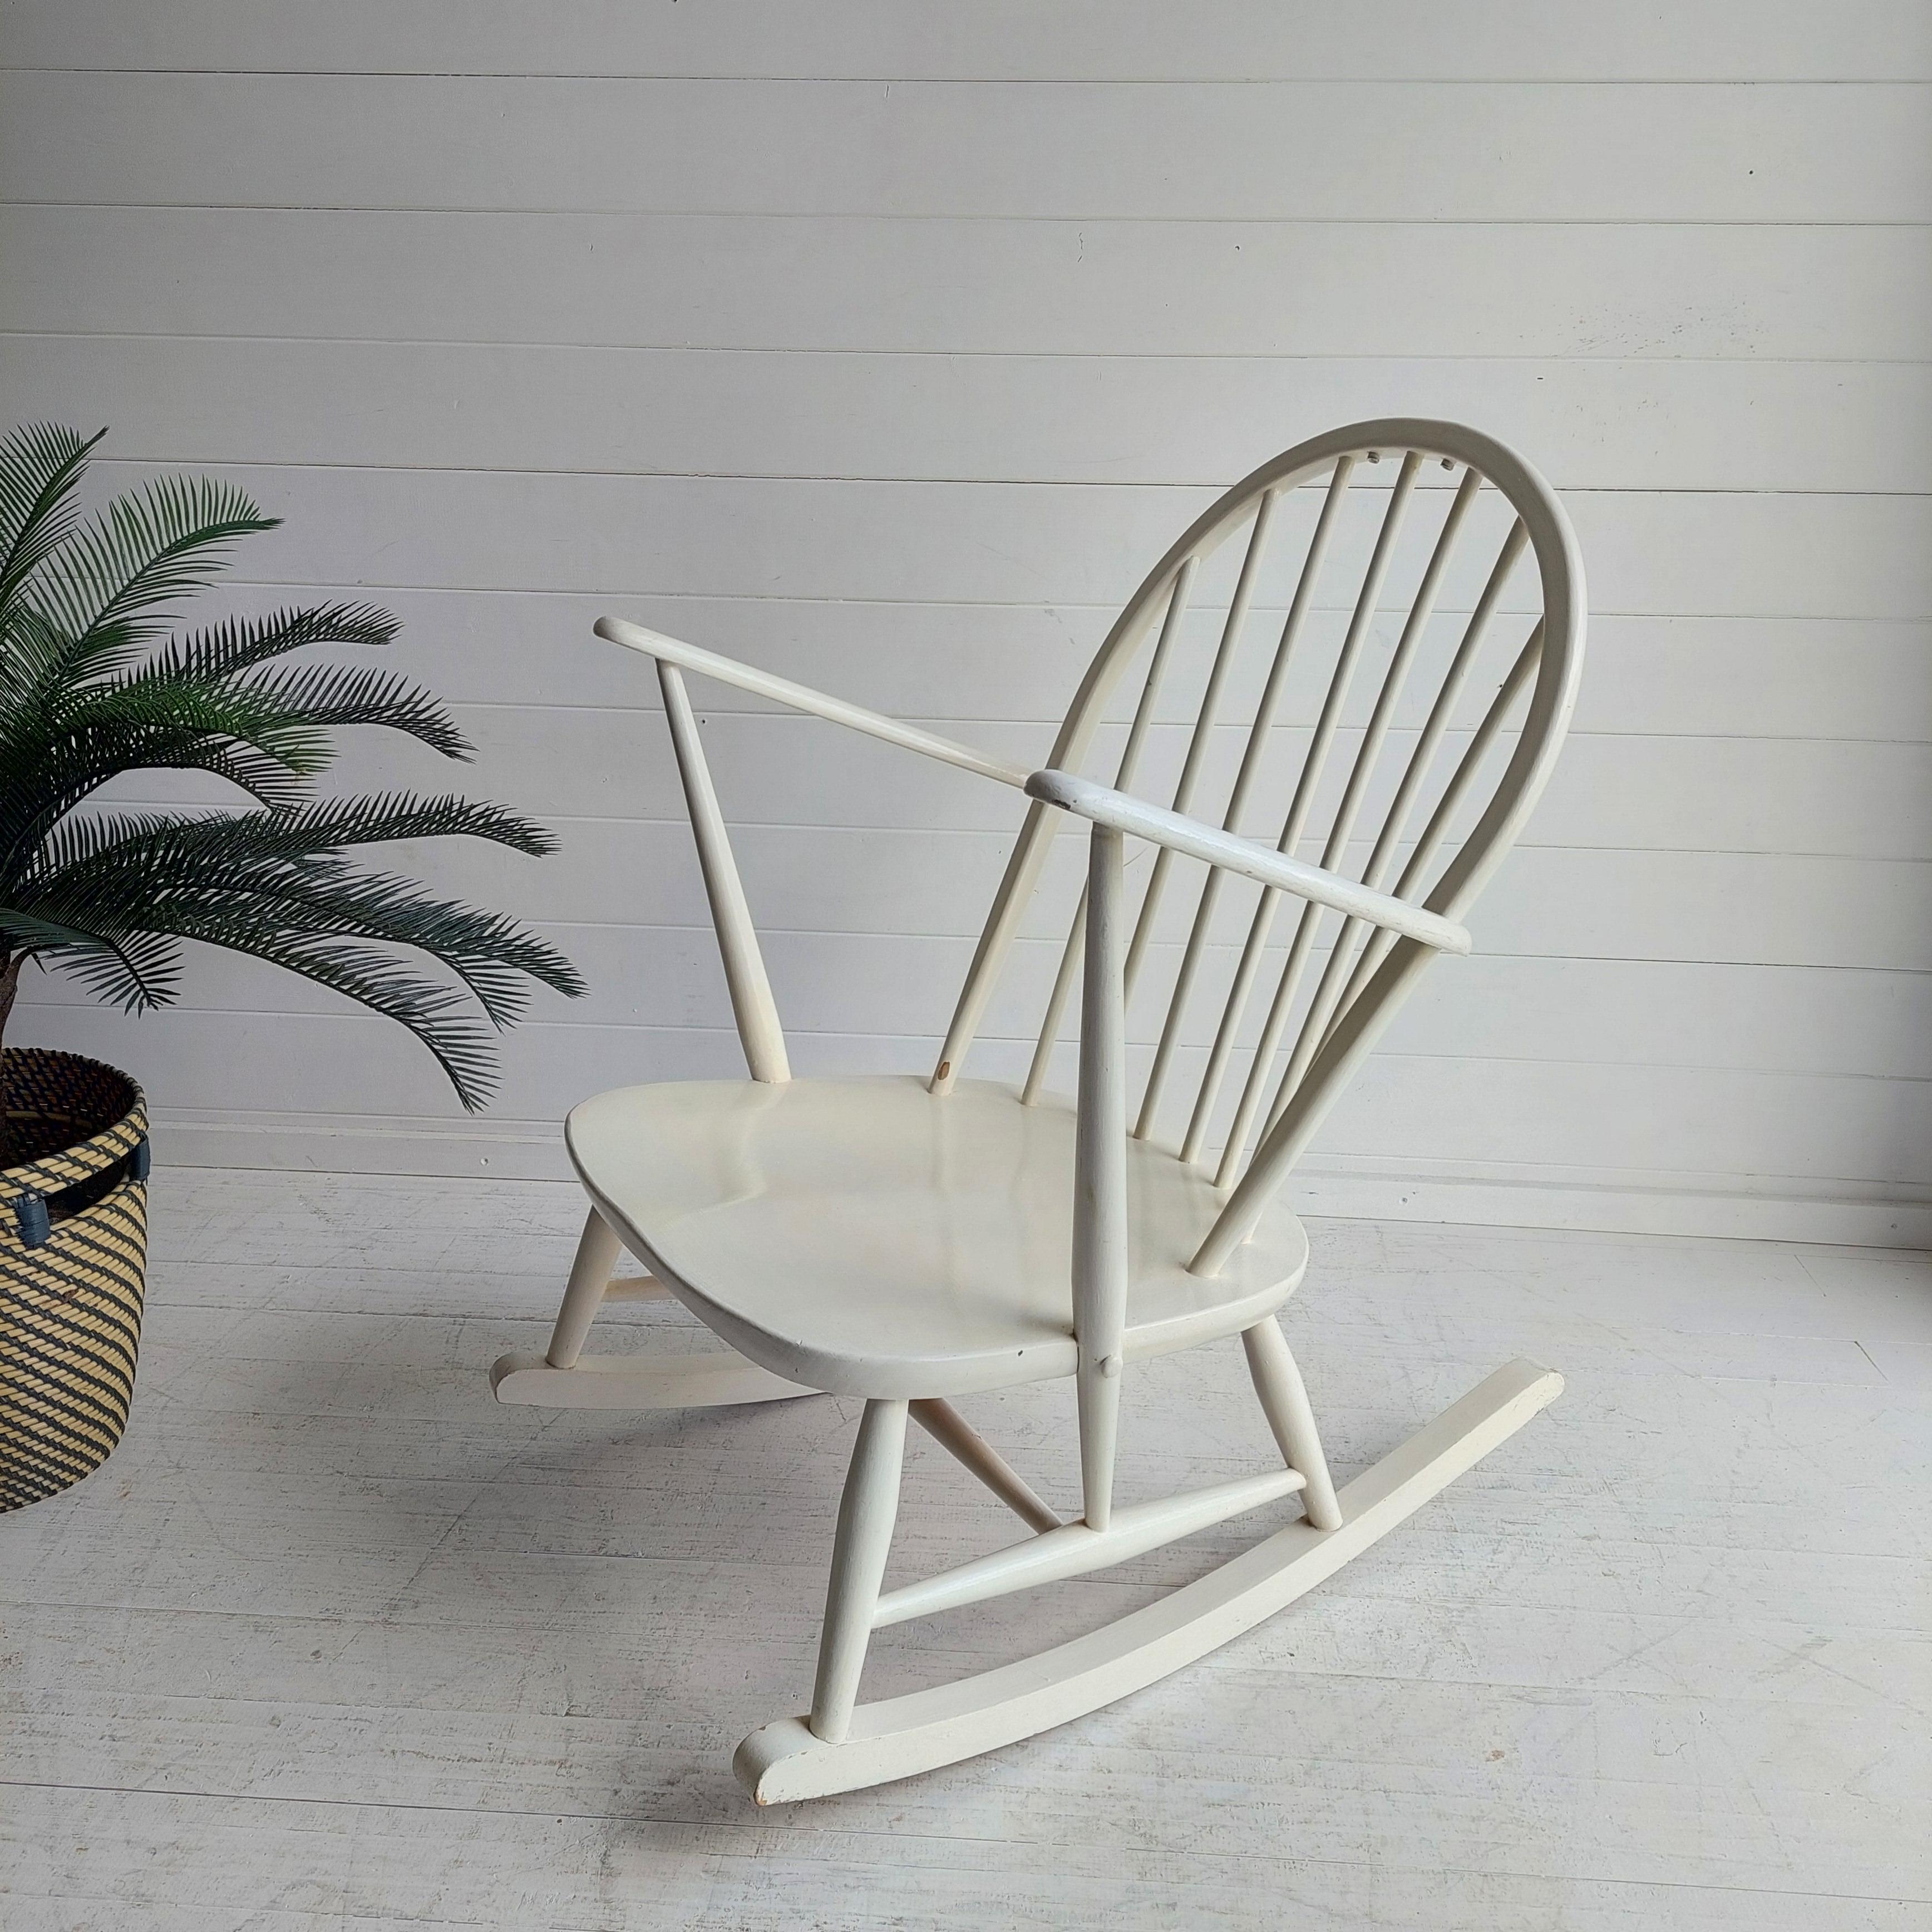 20th Century Midcentury No 470 Windsor Rocking Chair by Lucian Ercolani for Ercol, 1960s